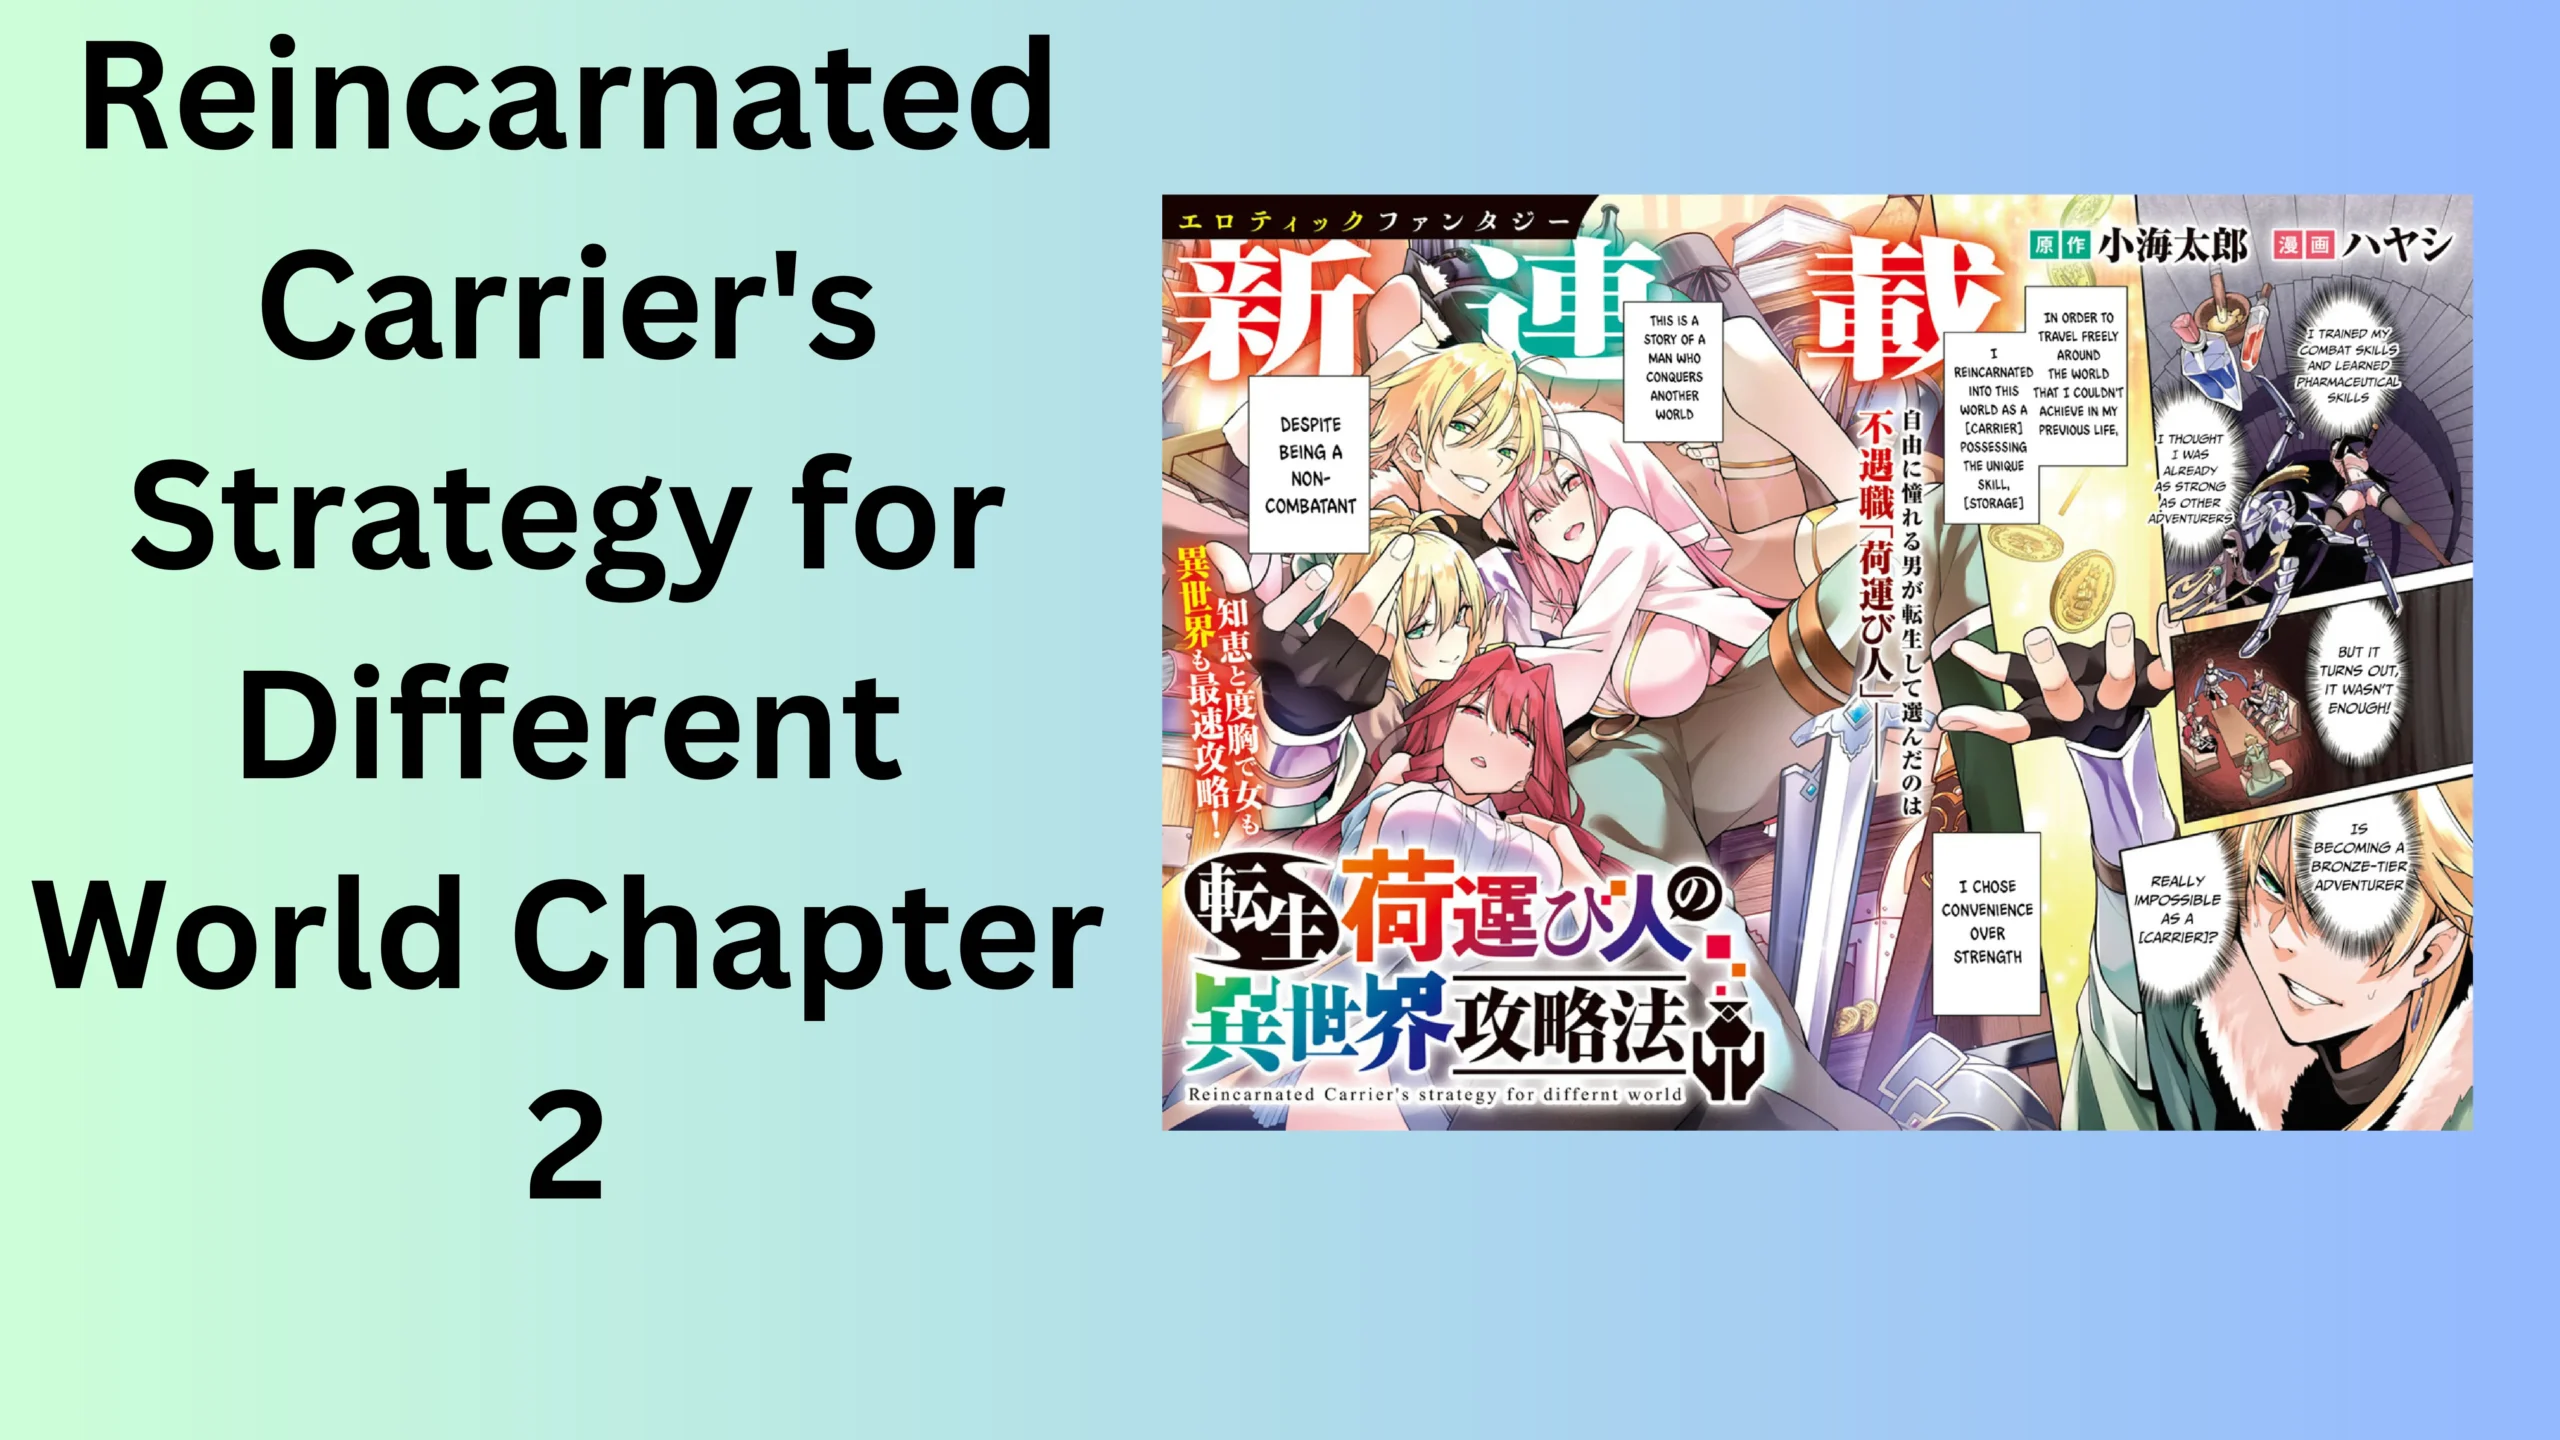 Reincarnated Carrier's Strategy for Different World Chapter 2